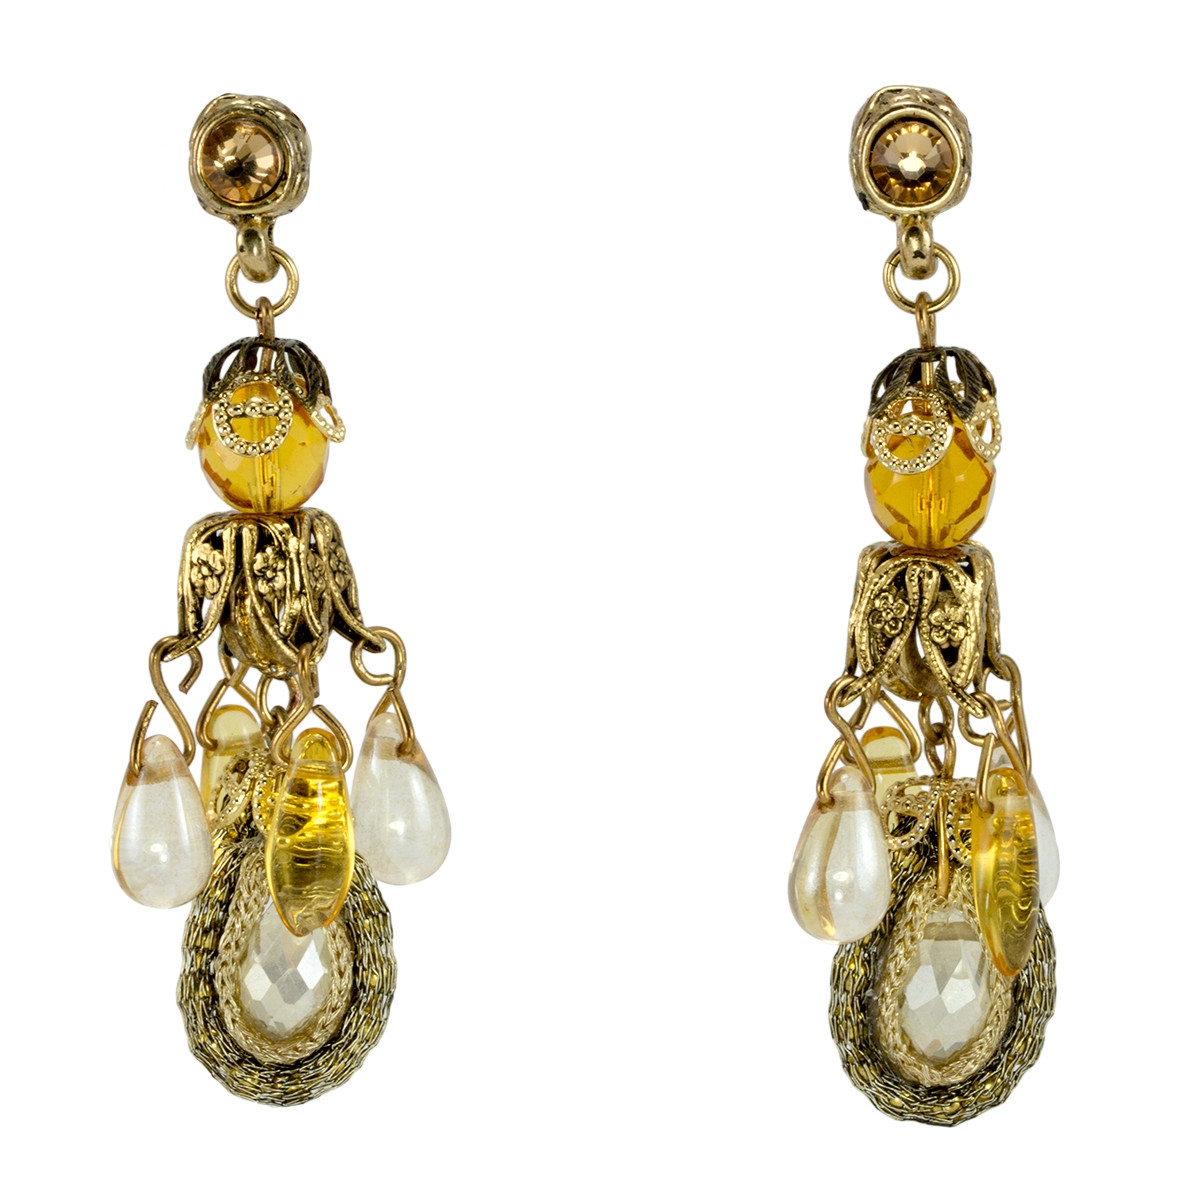 Anat Collection Yellow and Gold Nouveau Glam Earrings